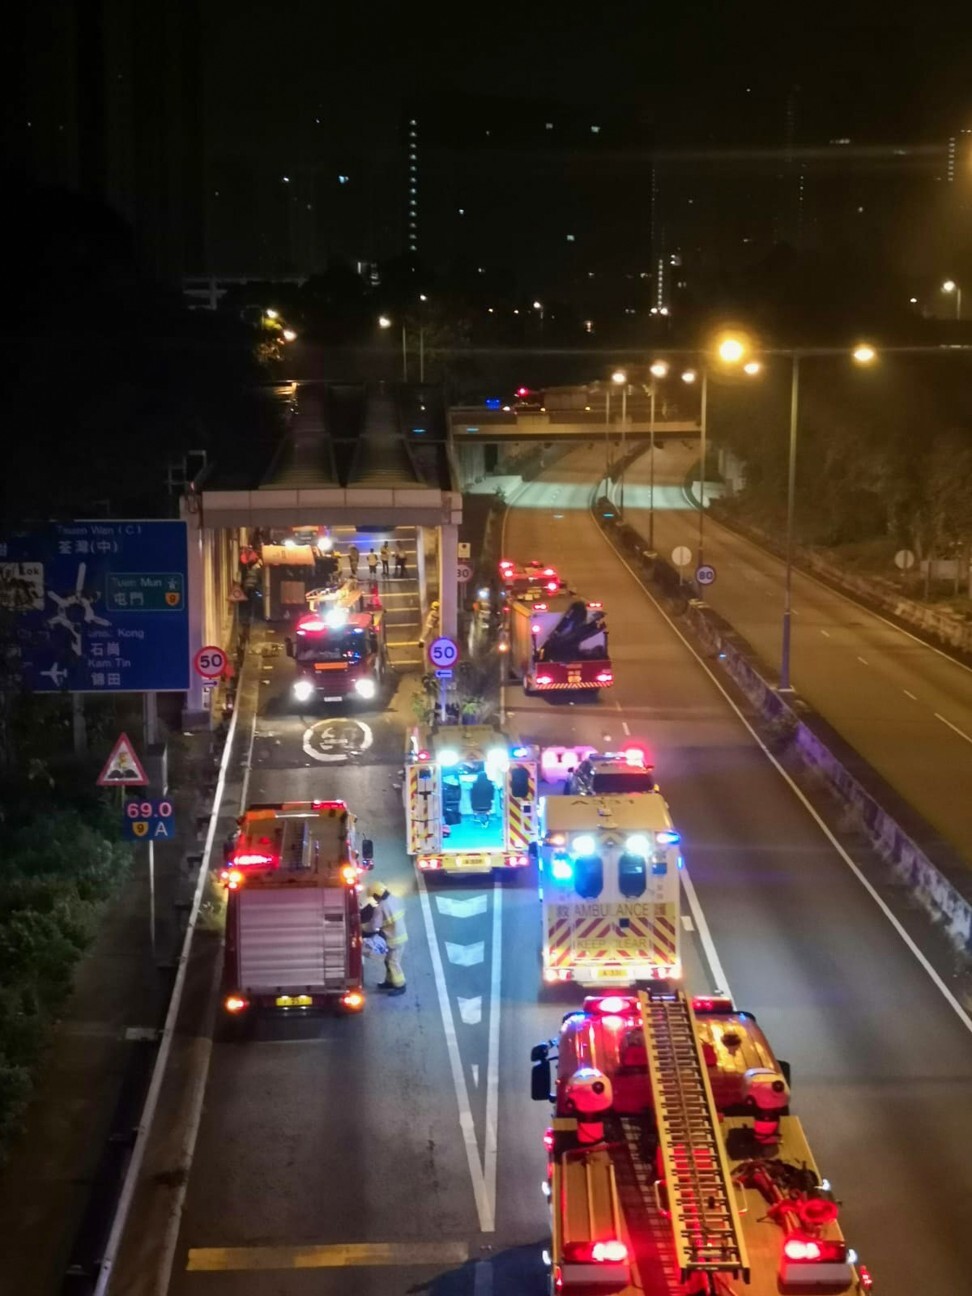 Emergency services attend the site of a crash on Cheung Pei Shan Road in Tsuen Wan in the early hours of Wednesday. Photo: Facebook